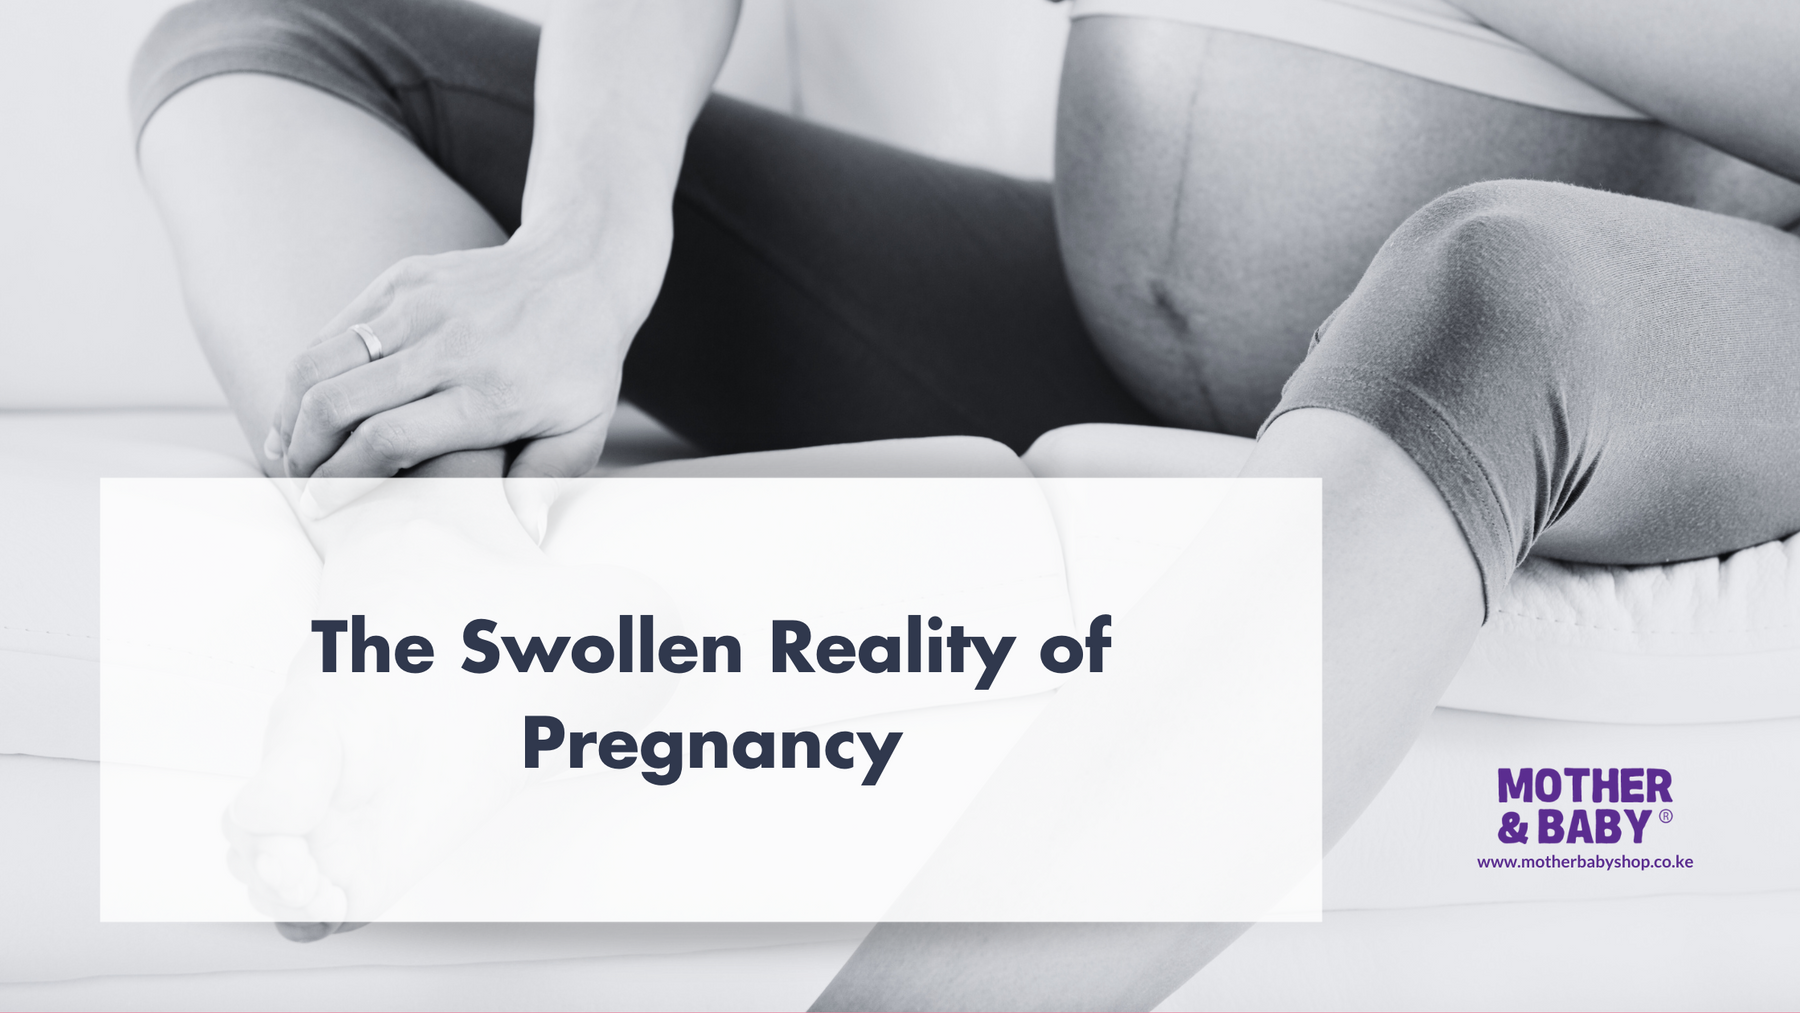 The Swollen Reality of Pregnancy